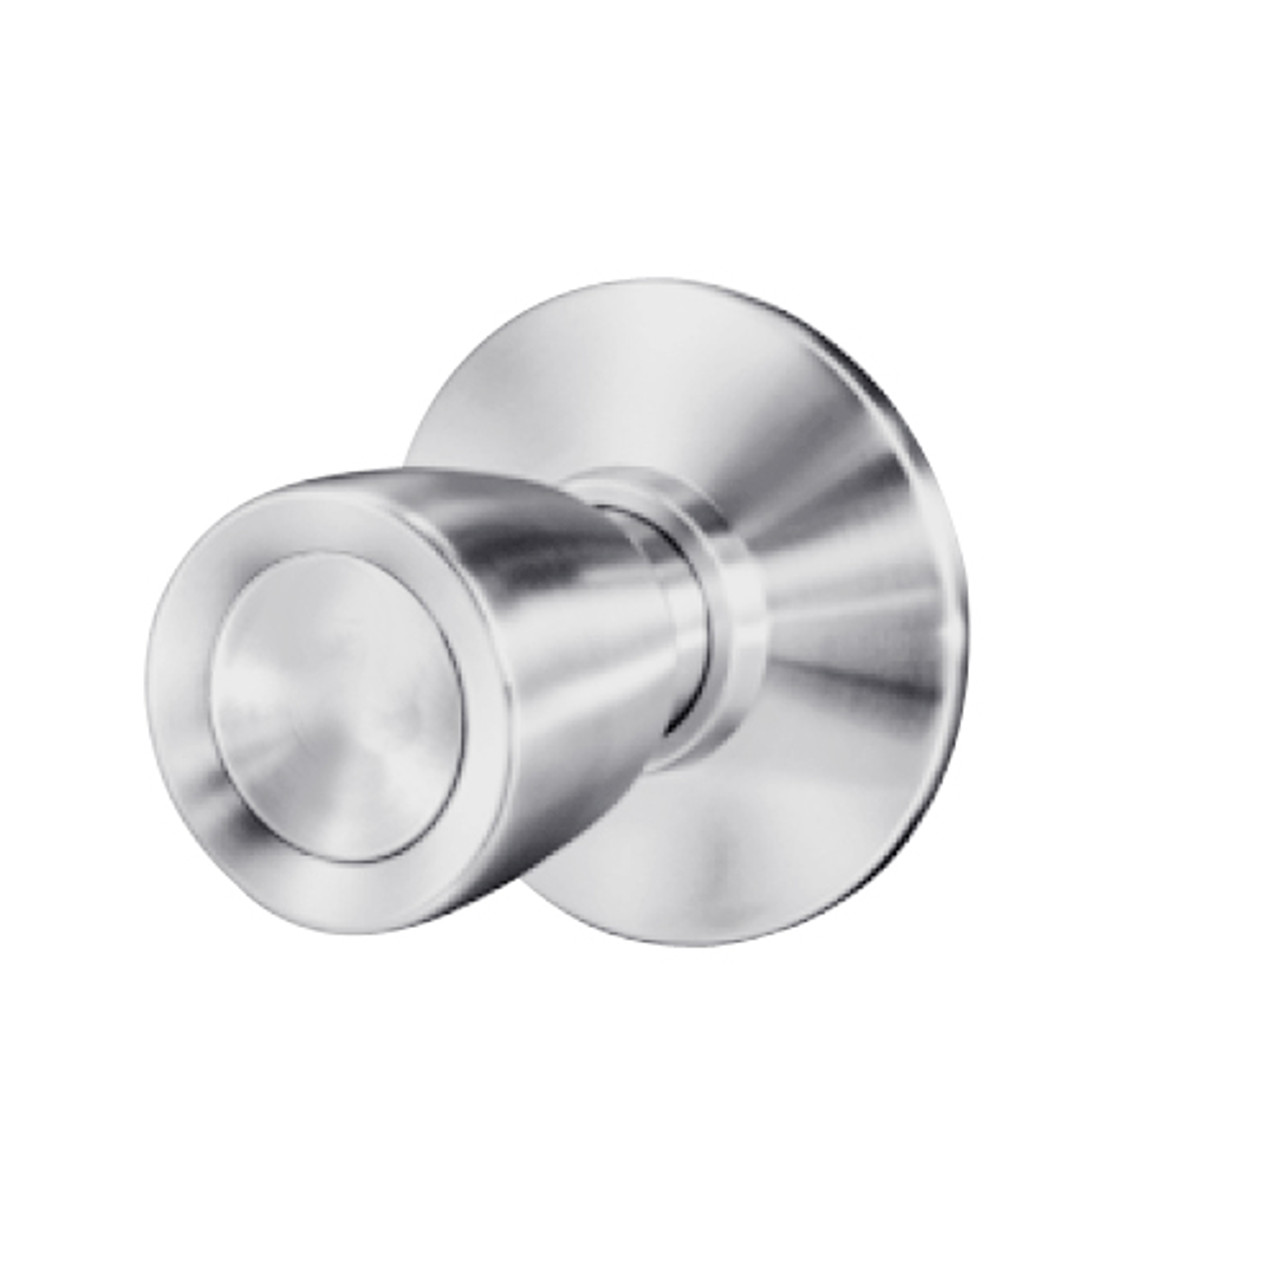 8K30Y6DSTK626 Best 8K Series Exit Heavy Duty Cylindrical Knob Locks with Tulip Style in Satin Chrome